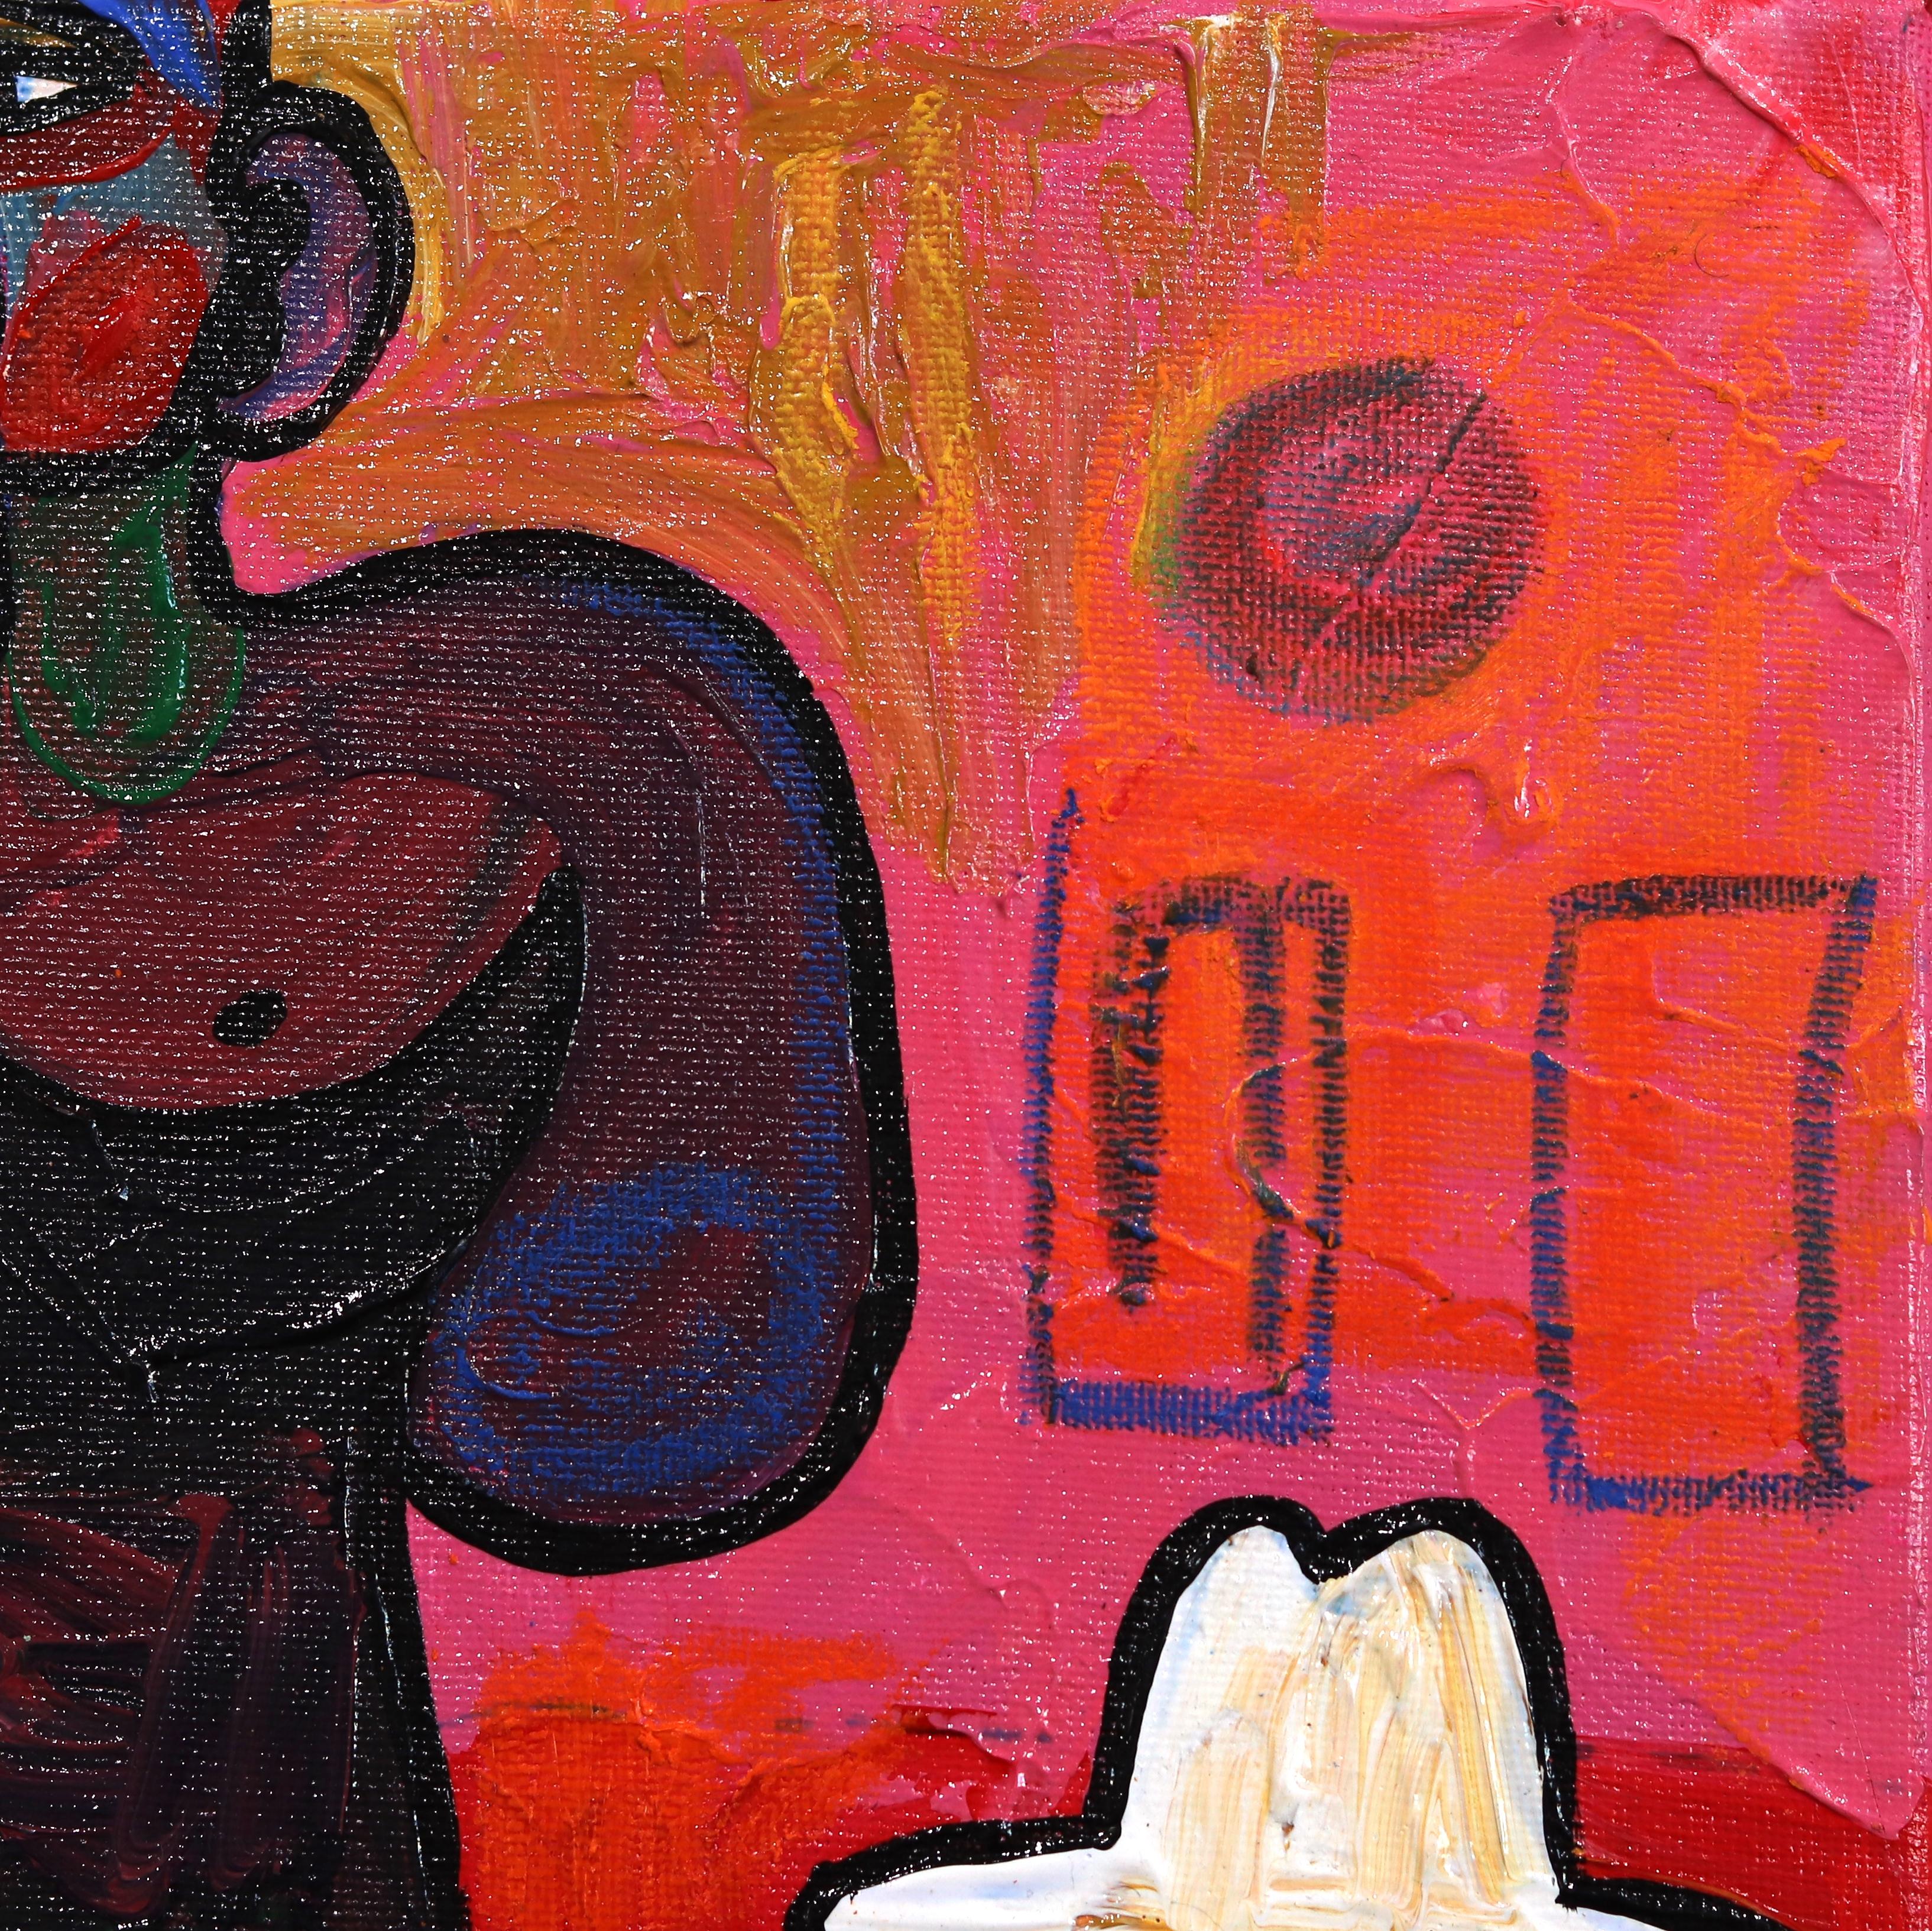 Valerie Etitinwo's unique approach to abstract figurative painting celebrates the unconventional beauty found in imperfection and awkwardness. The Nigerian-Swiss artist uses bold colors and disorganized shapes to create captivating artworks that